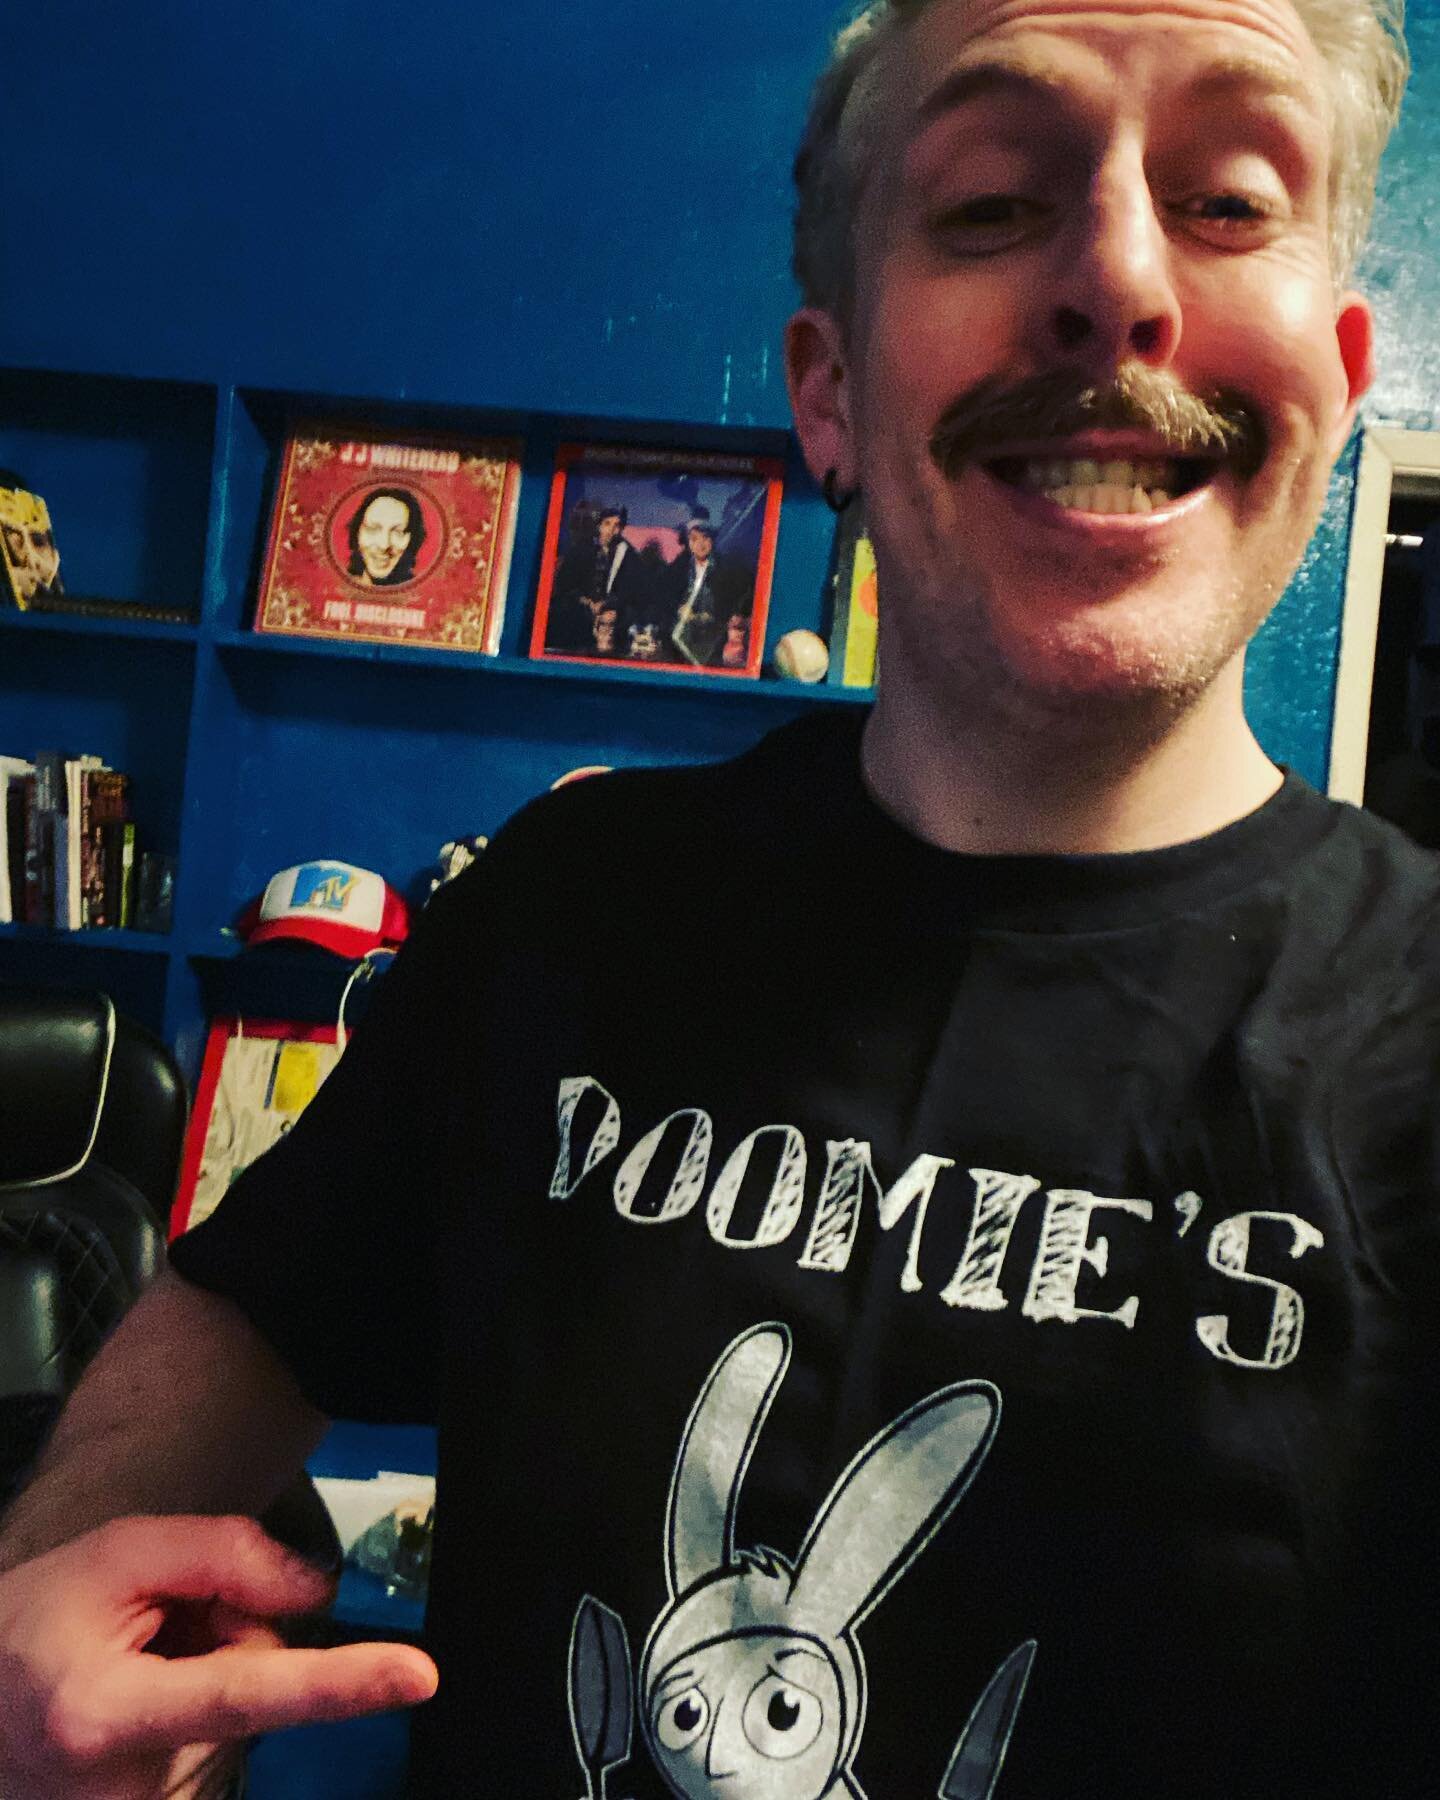 When in Hollywood, get yourselves down to @doomies for the best vegan fried chicken I&rsquo;ve ever had. So good I bought the t-shirt! Just spotted a little @jjwhitesnake photobomb over my shoulder (he&rsquo;s kindly let us have the run of his apartm